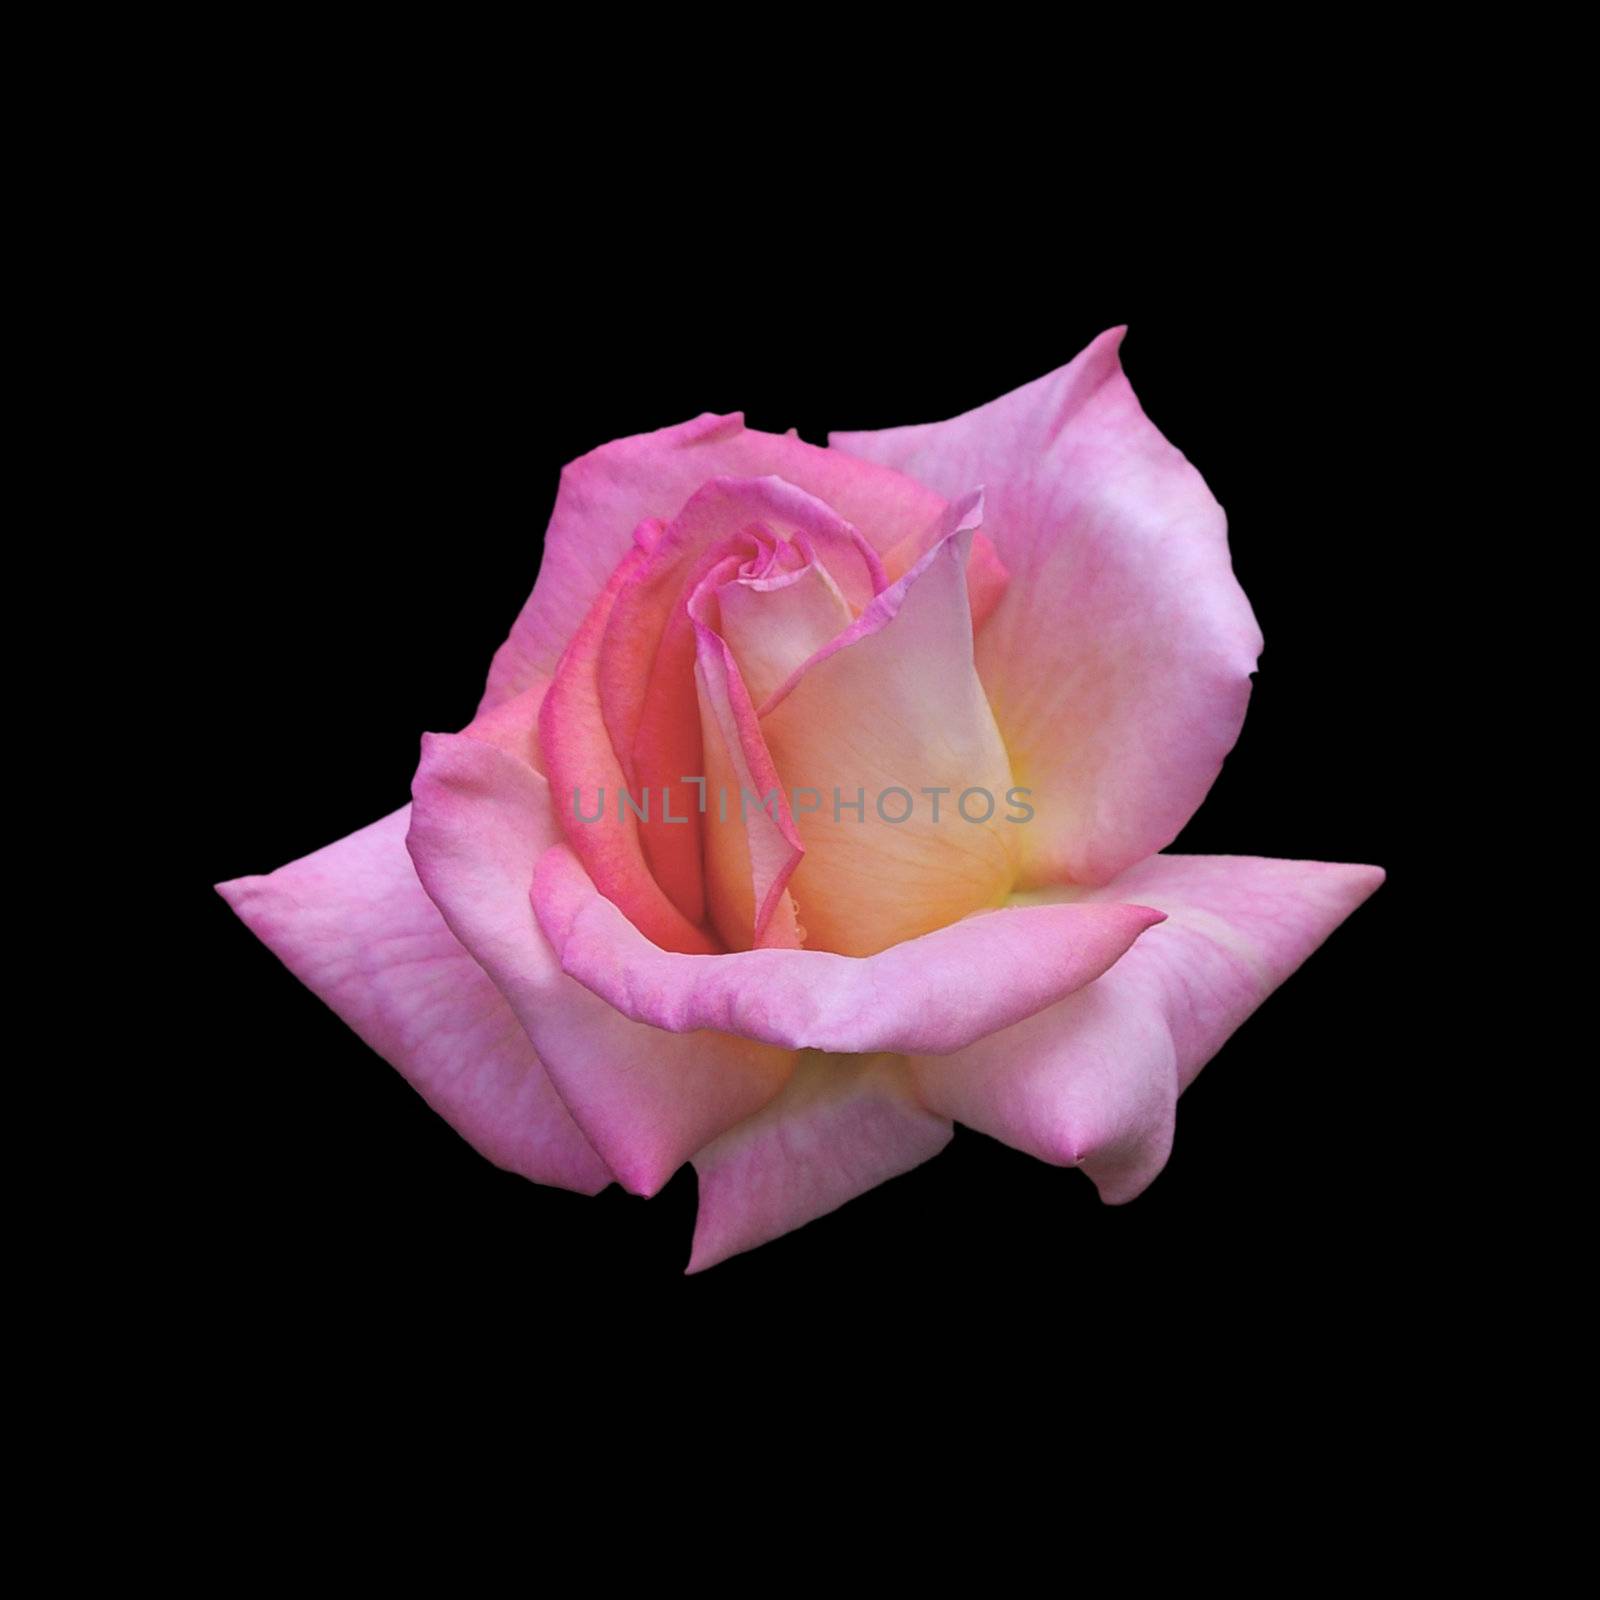 Pink and yellow rose (Hybrid Tea) by jmci